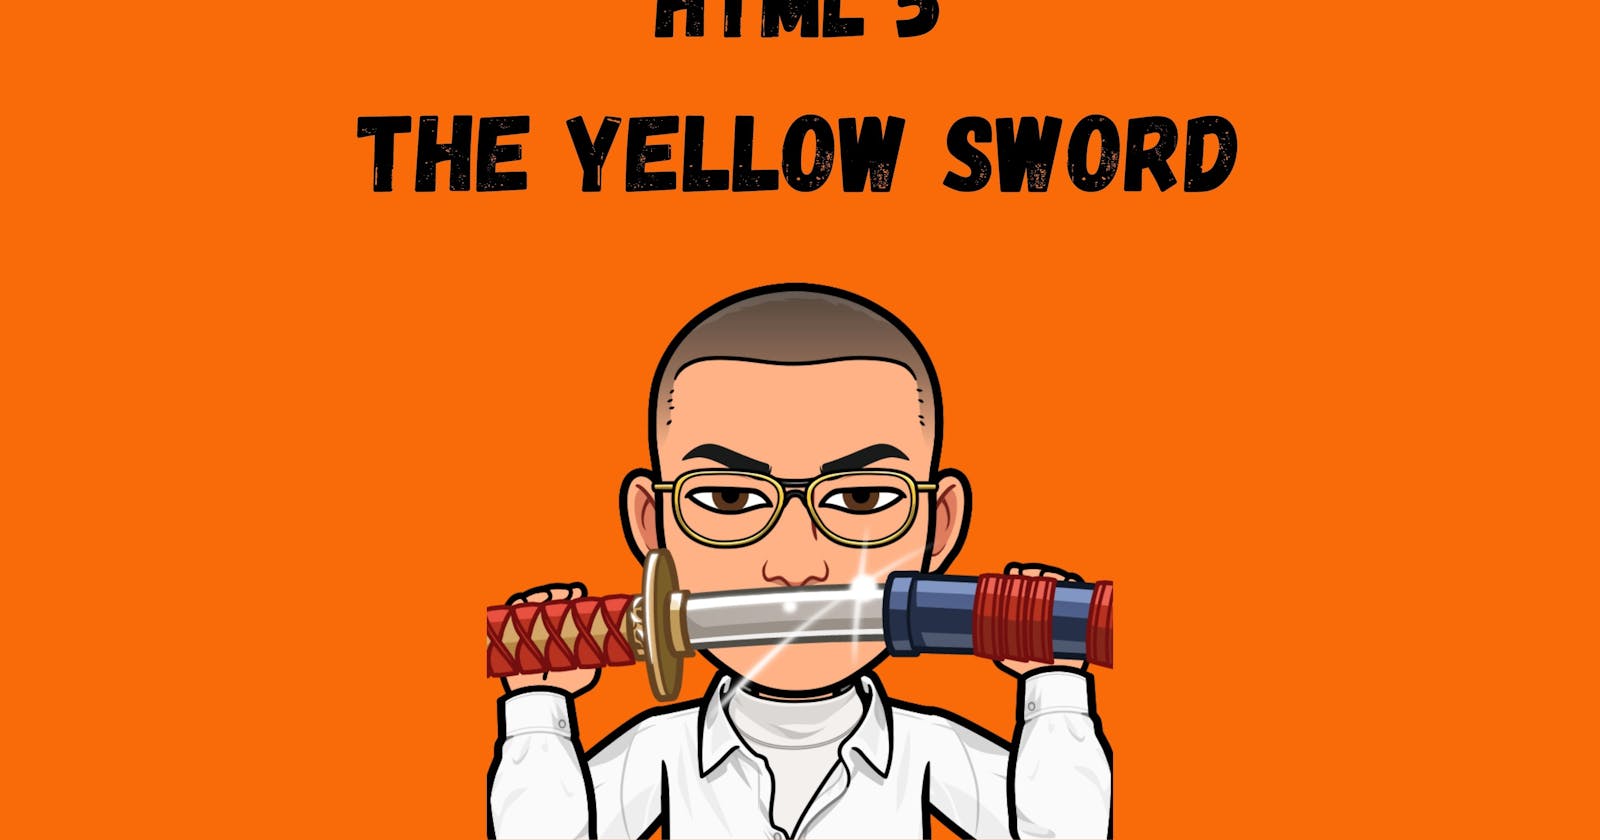 HTML 5 and the Yellow Sword